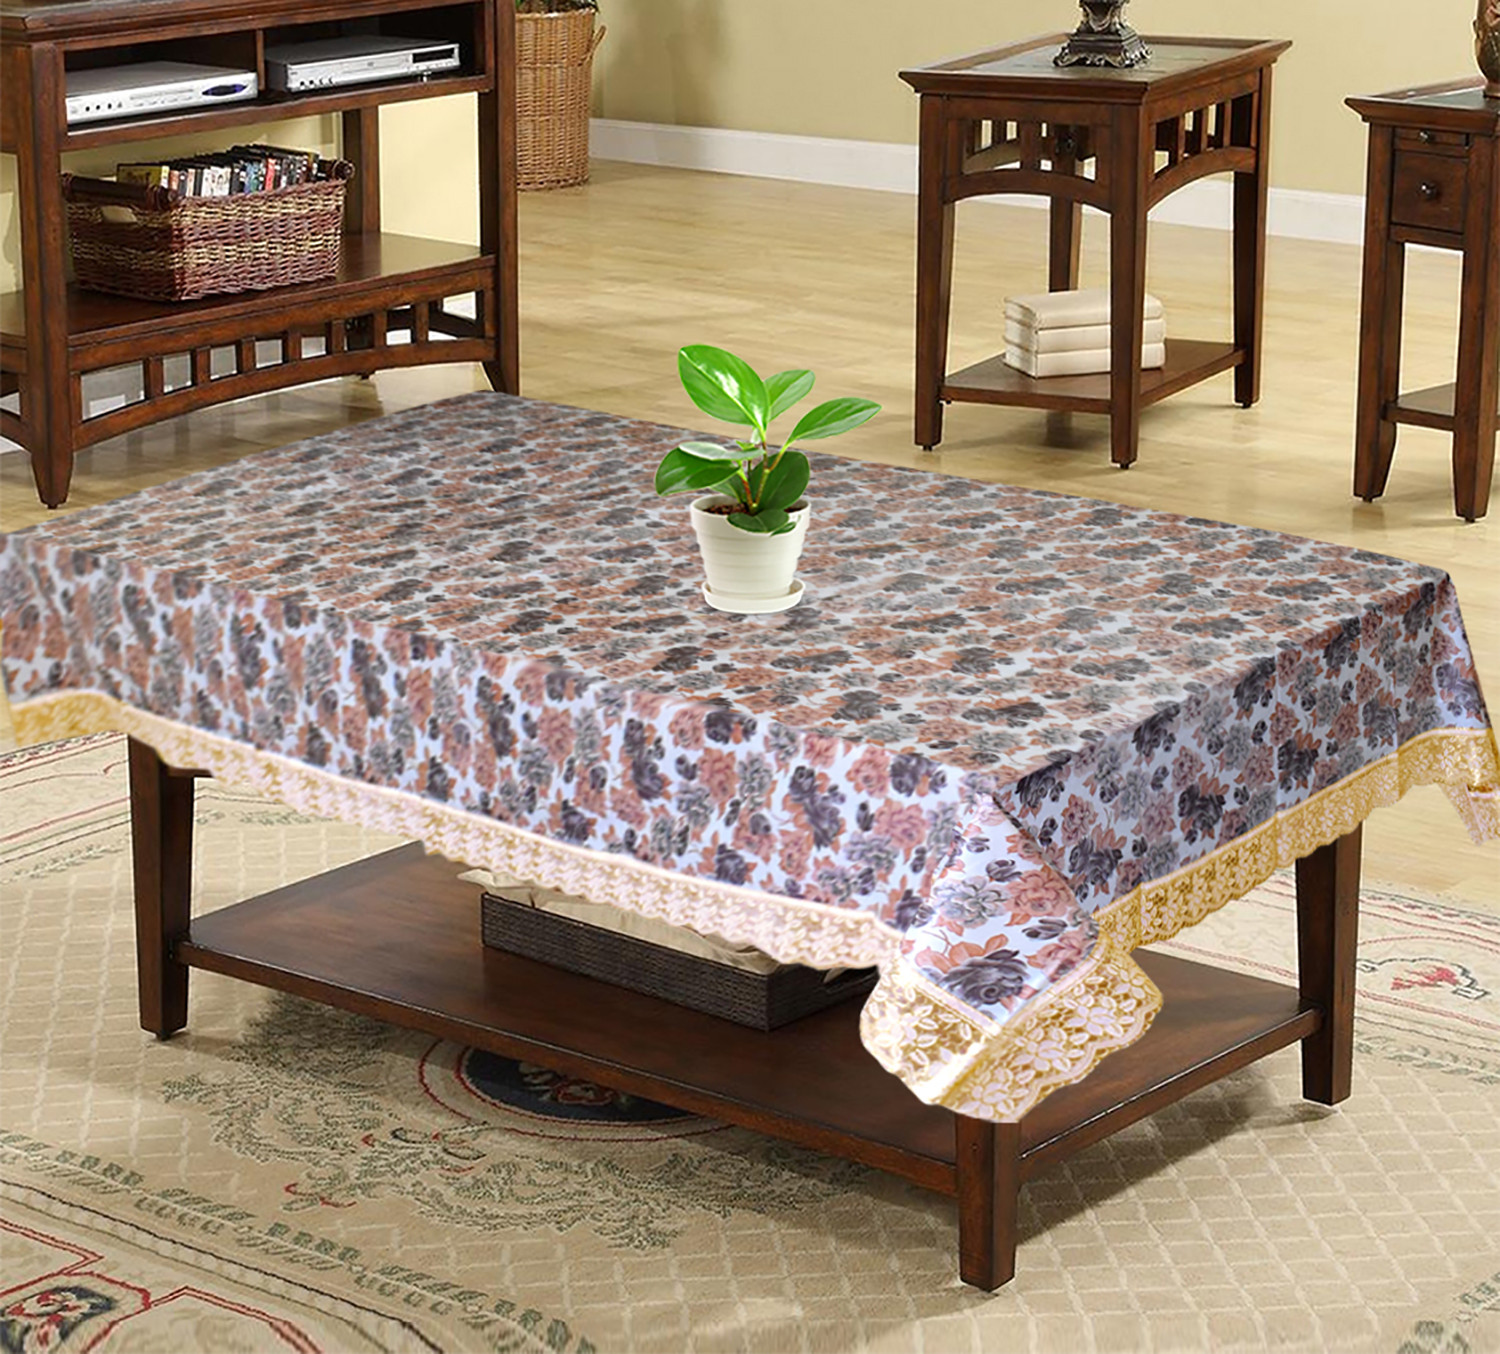 Kuber Industries Flower Printed PVC 4 Seater Center Table Cover, Protector With Gold Lace Border, 40